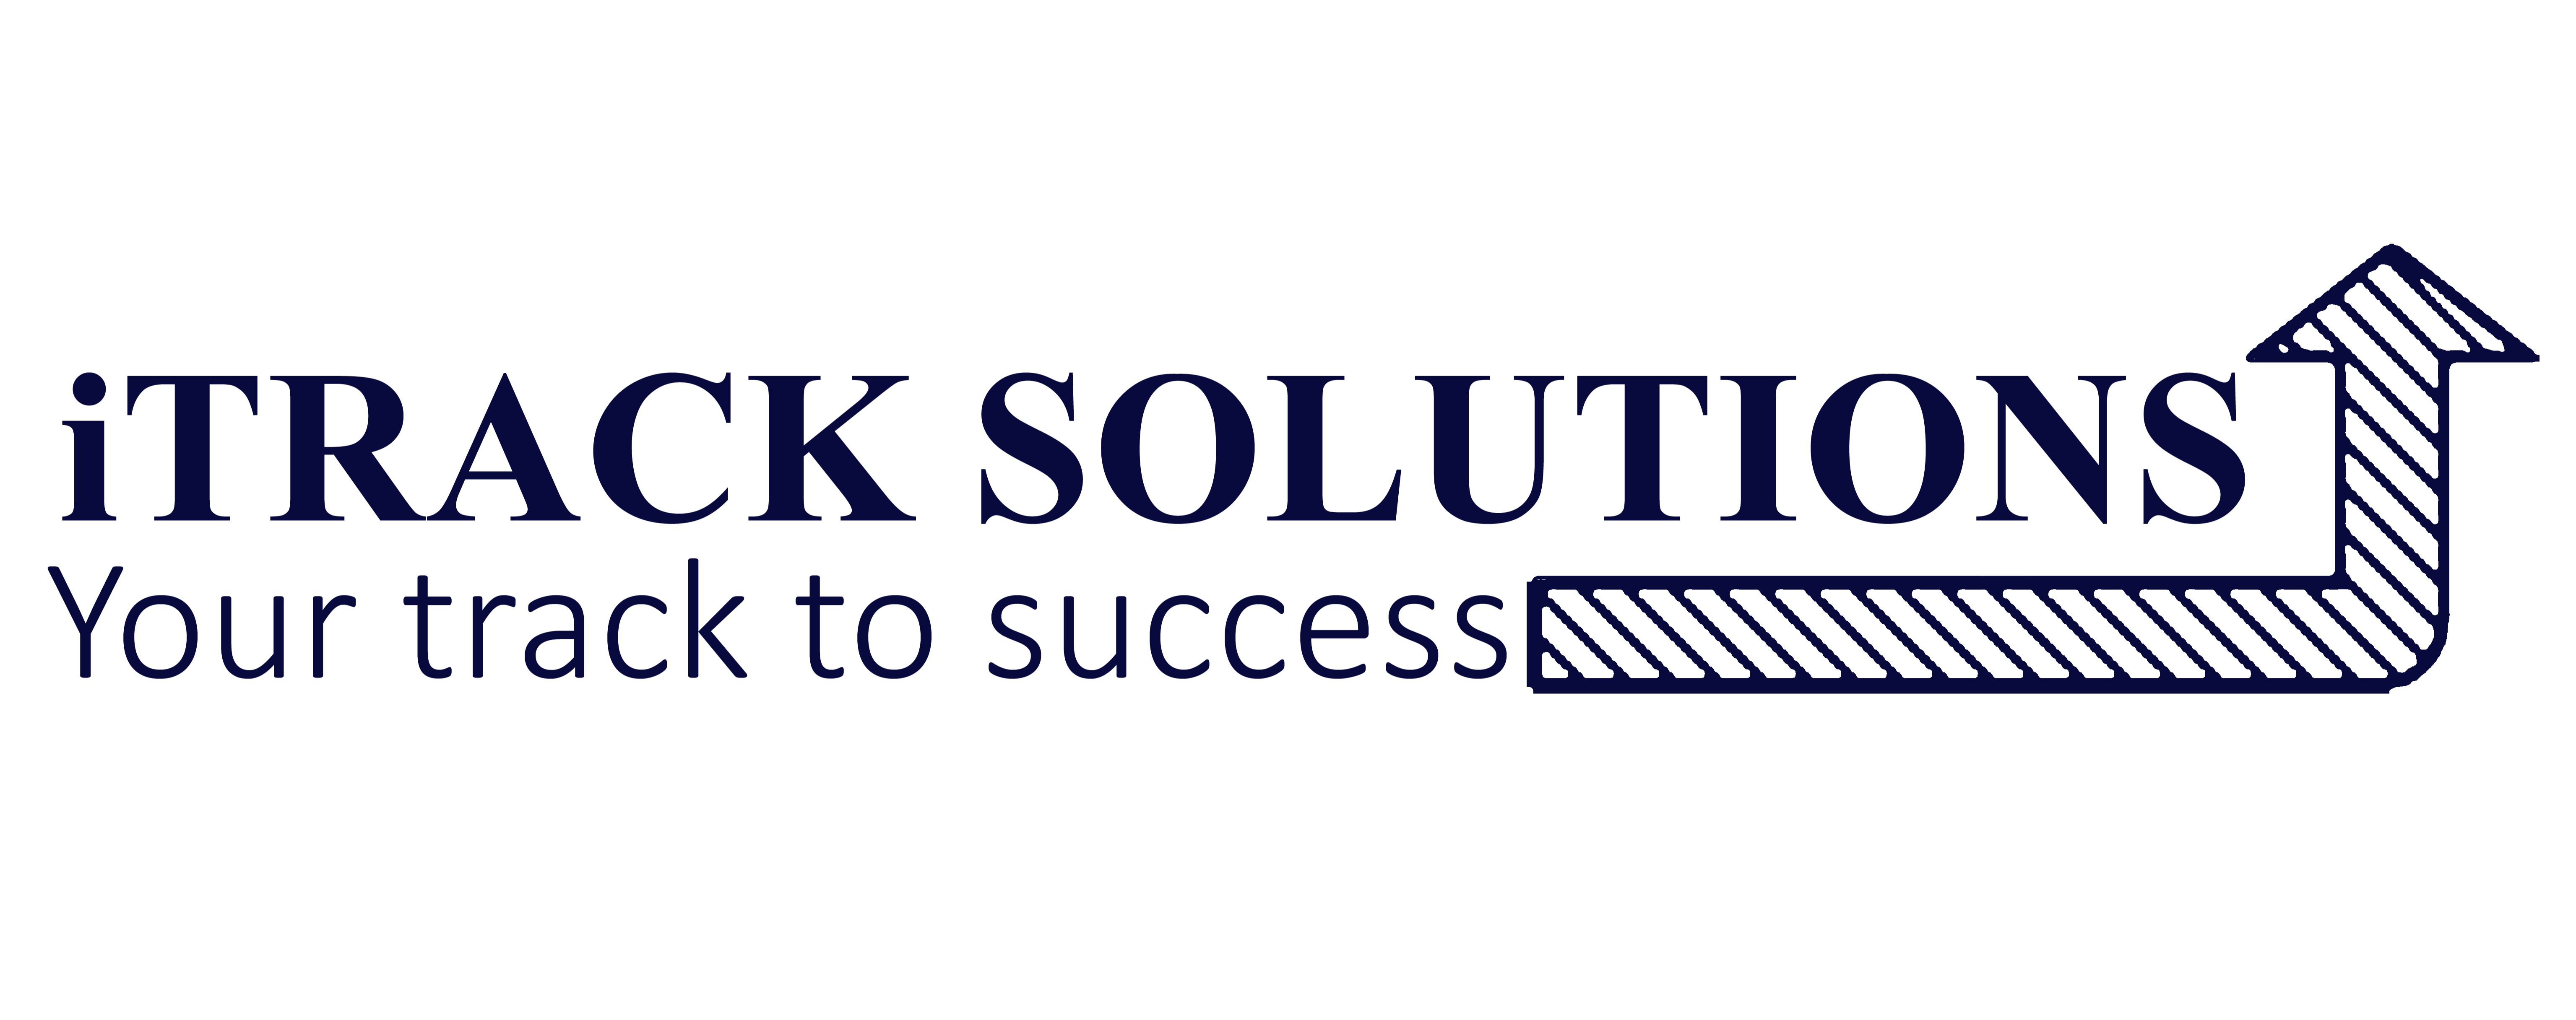 iTRACK SOLUTIONS